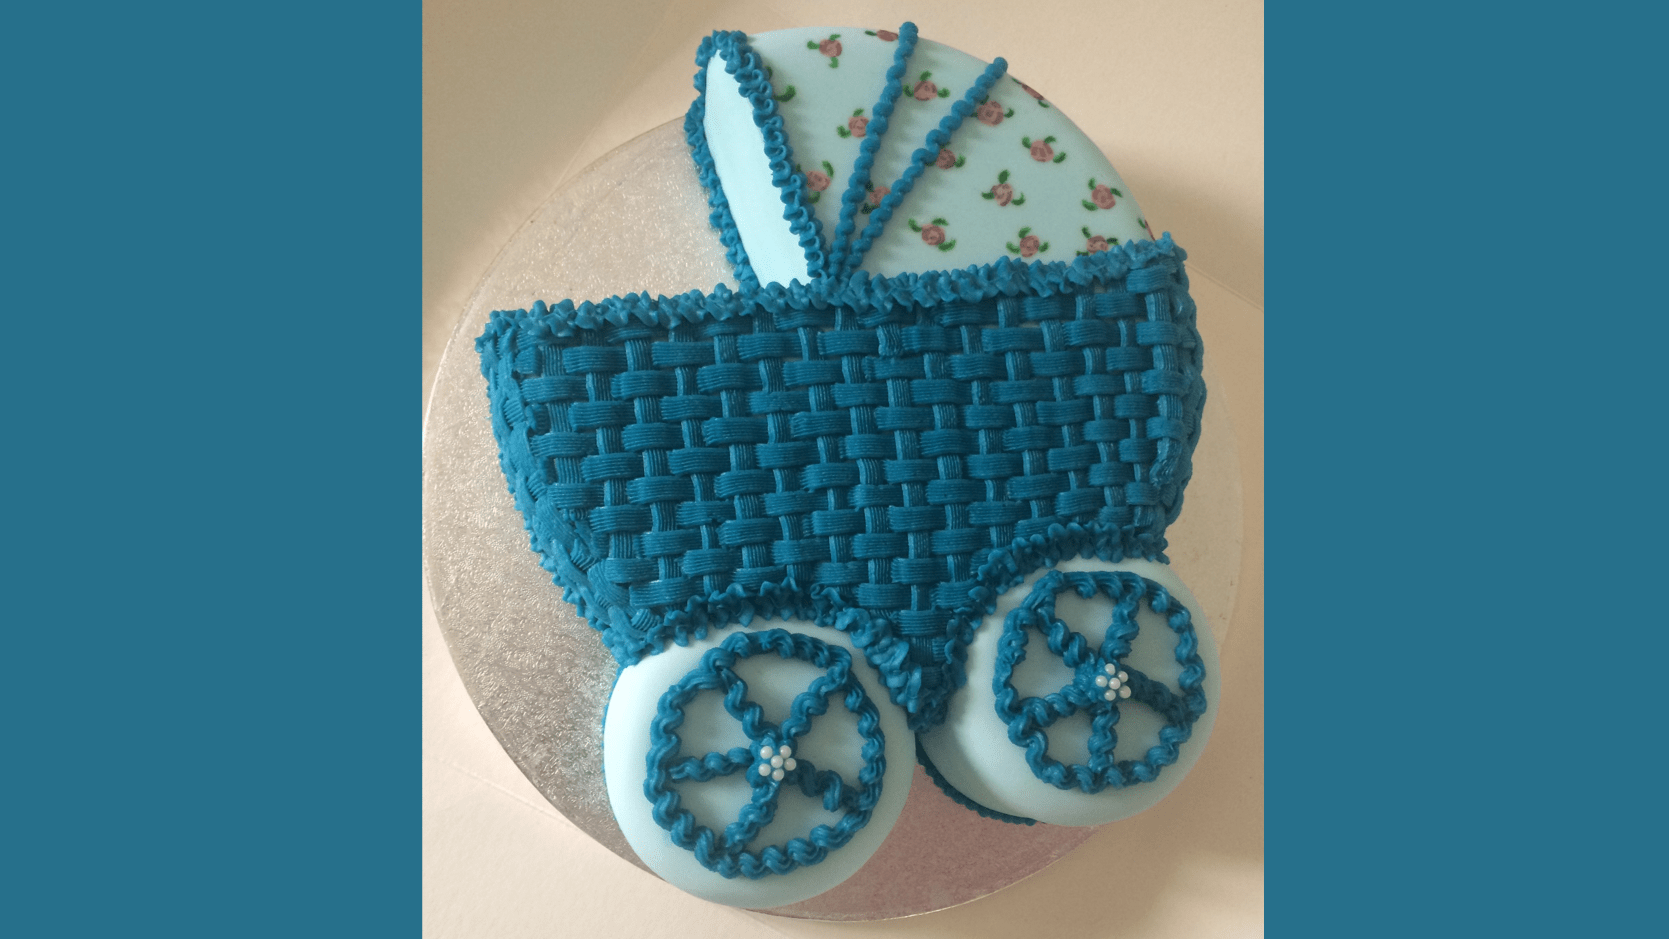 The Baby Carriage cake: Getting to grips with piping basket weave